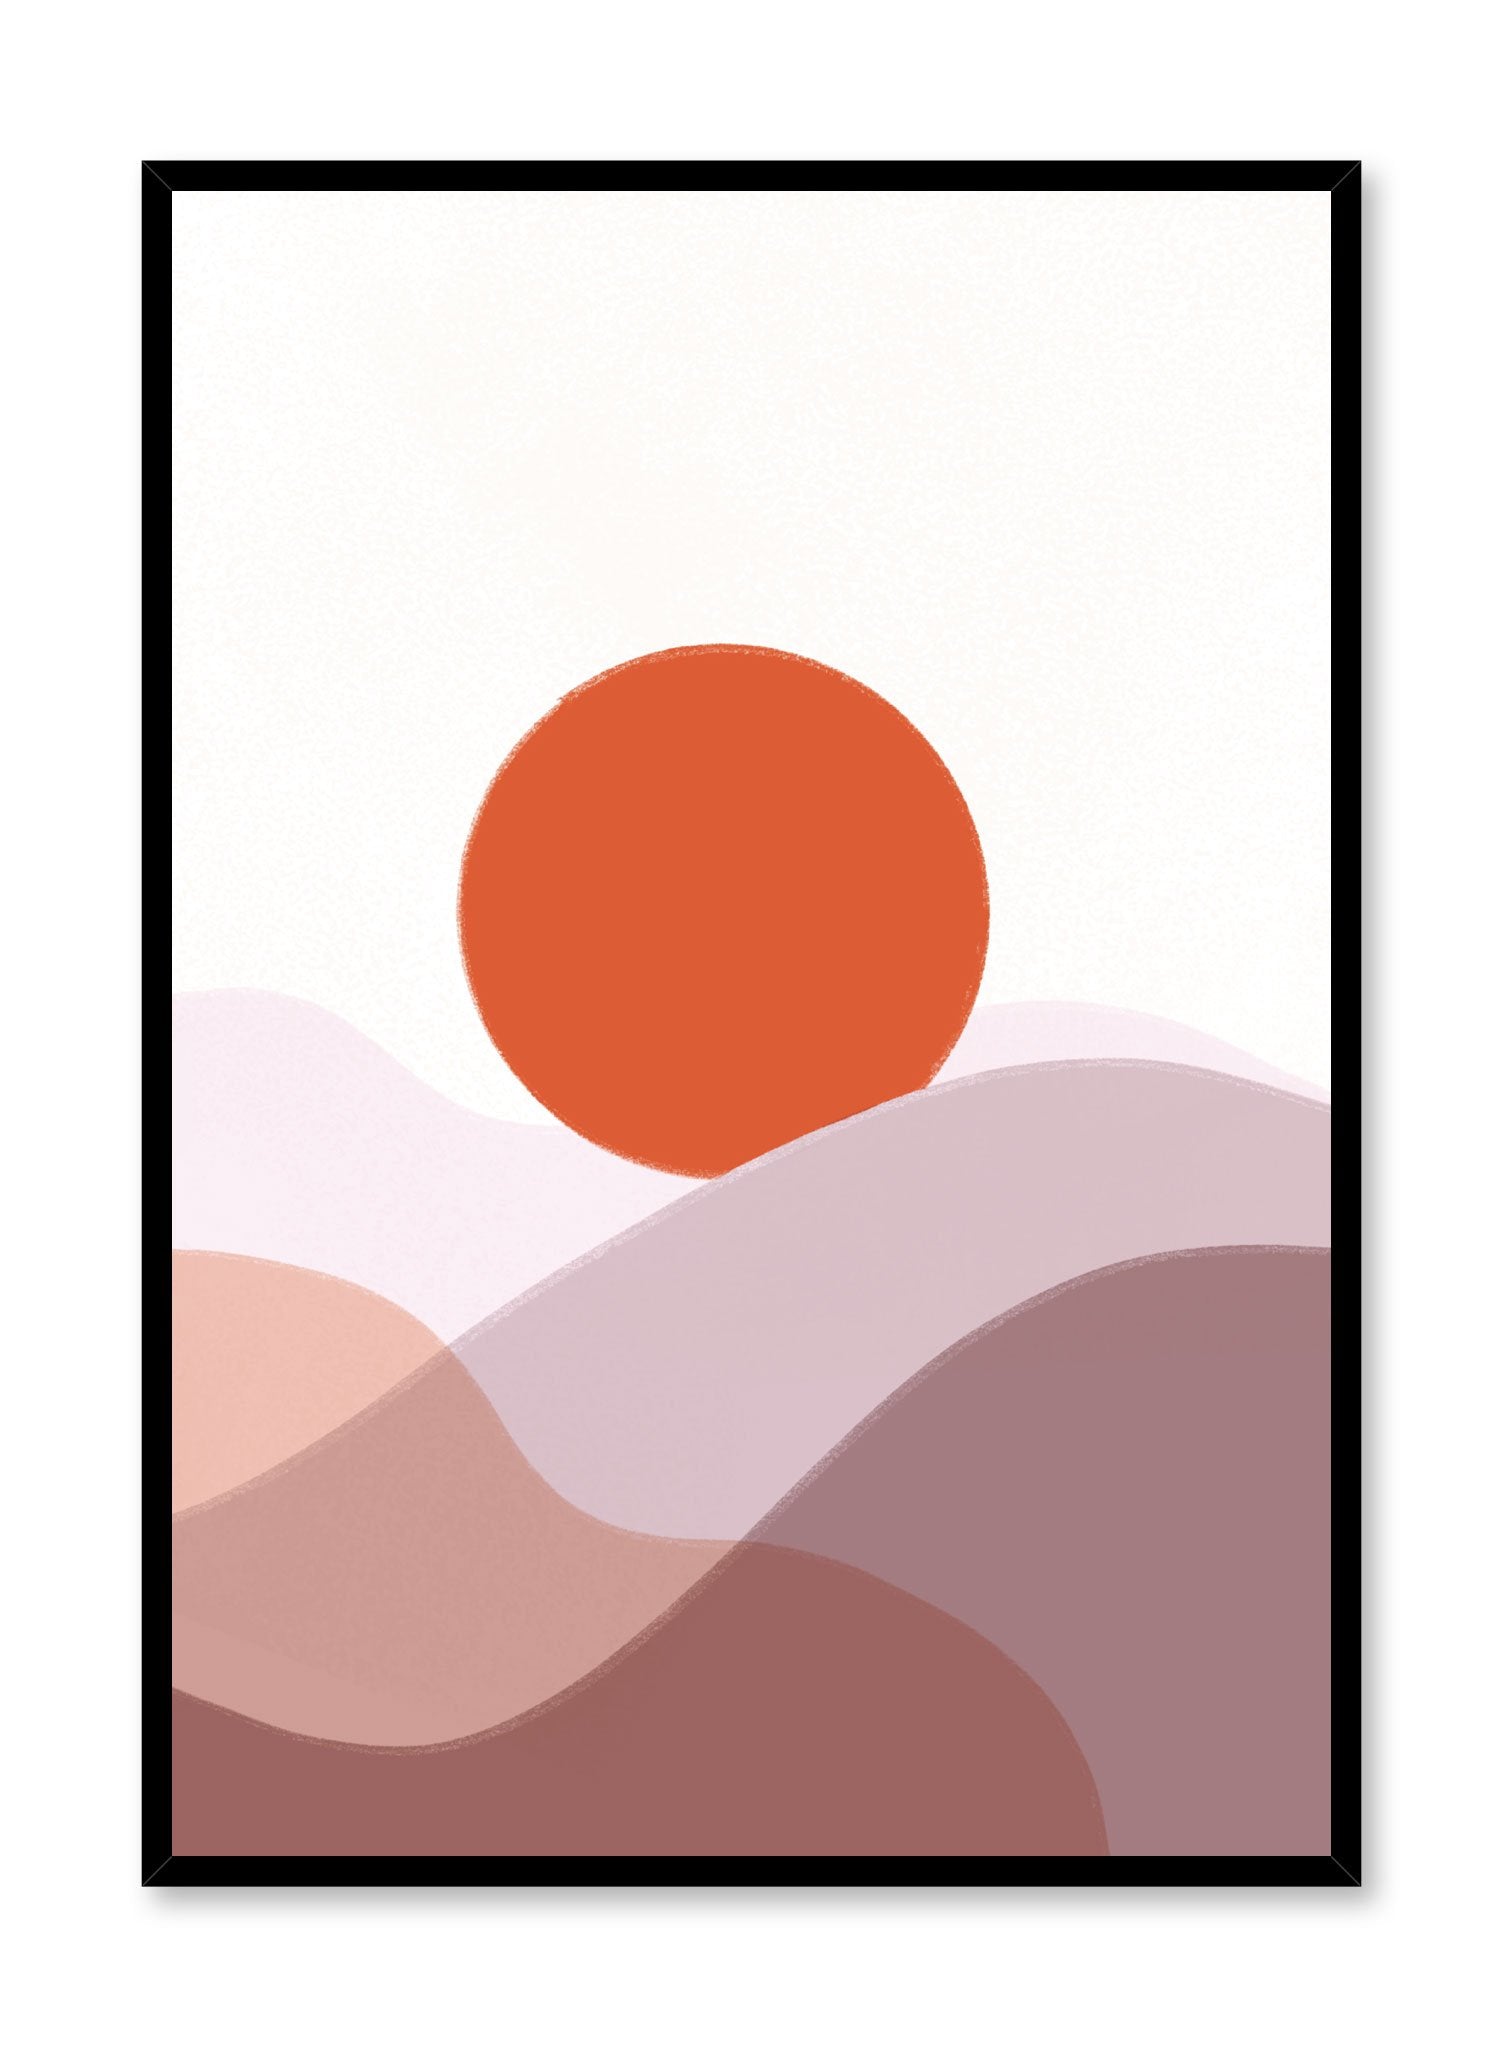 Modern minimalist poster by Opposite Wall with abstract design of Sand Dunes by Toffie Affichiste